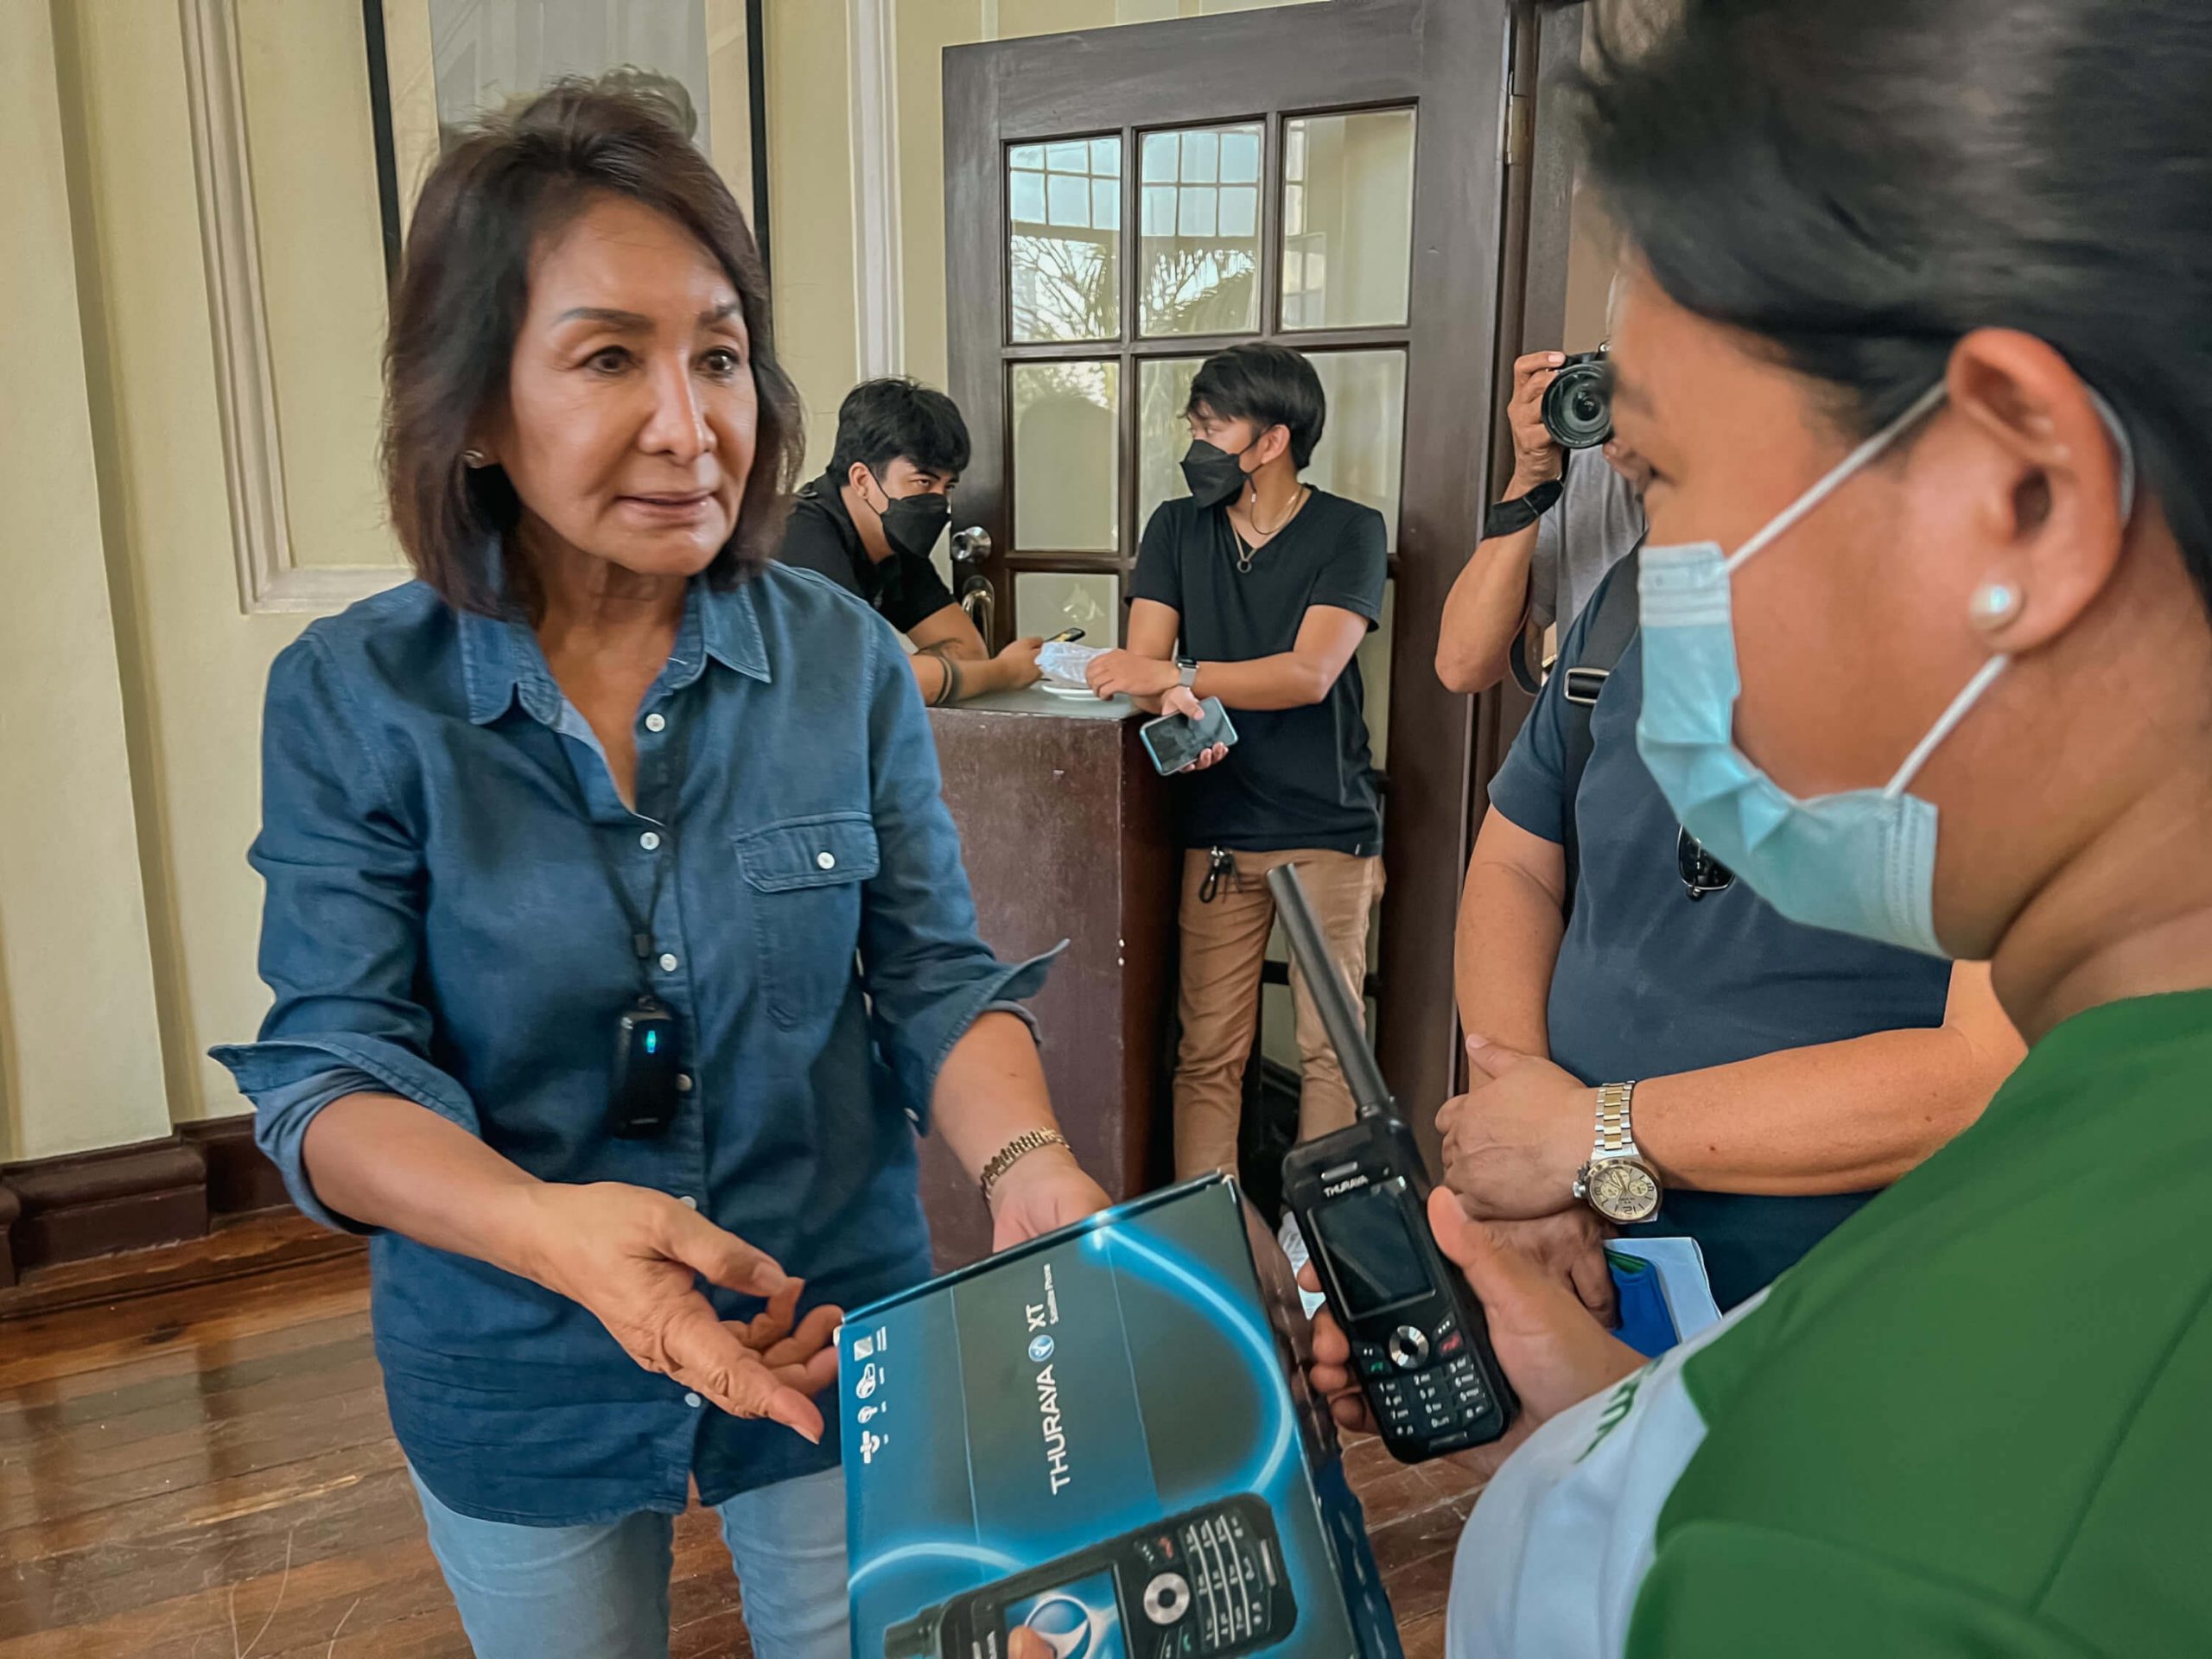 Cebu Governor Gwendolyn Garcia receives from Smart Group Corporate Communications VisMin Manager Marylou Gocotano a satellite phone donated by the telco to help in communications as part of disaster recovery in the wake of Typhoon Odette.